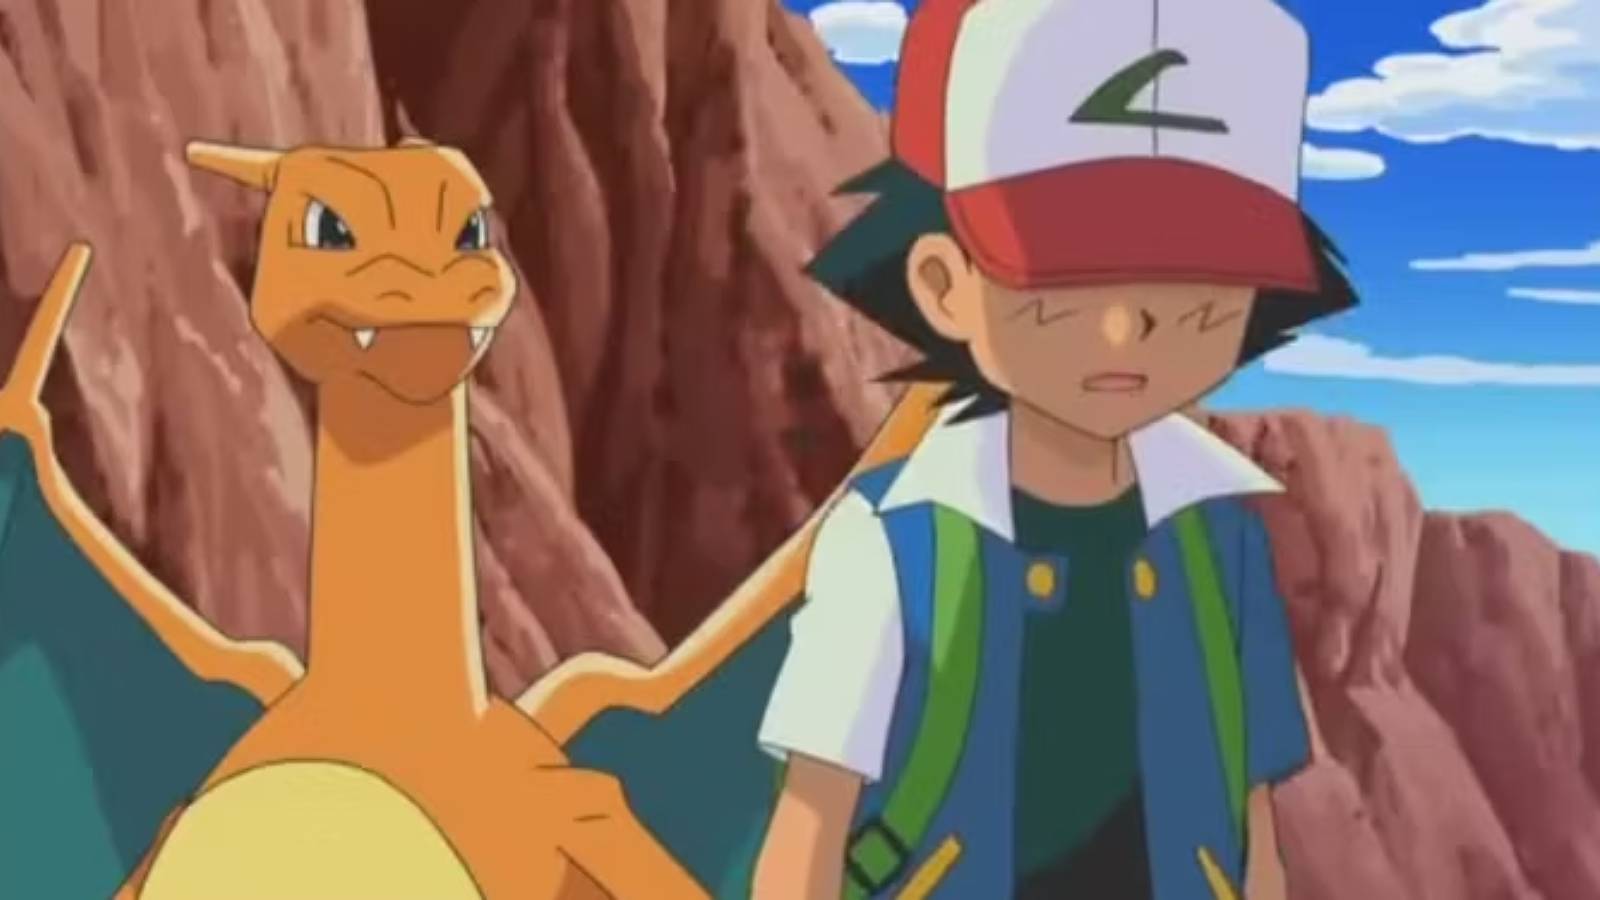 A screenshot from the Pokemon anime shows Ash walking away from Charizard